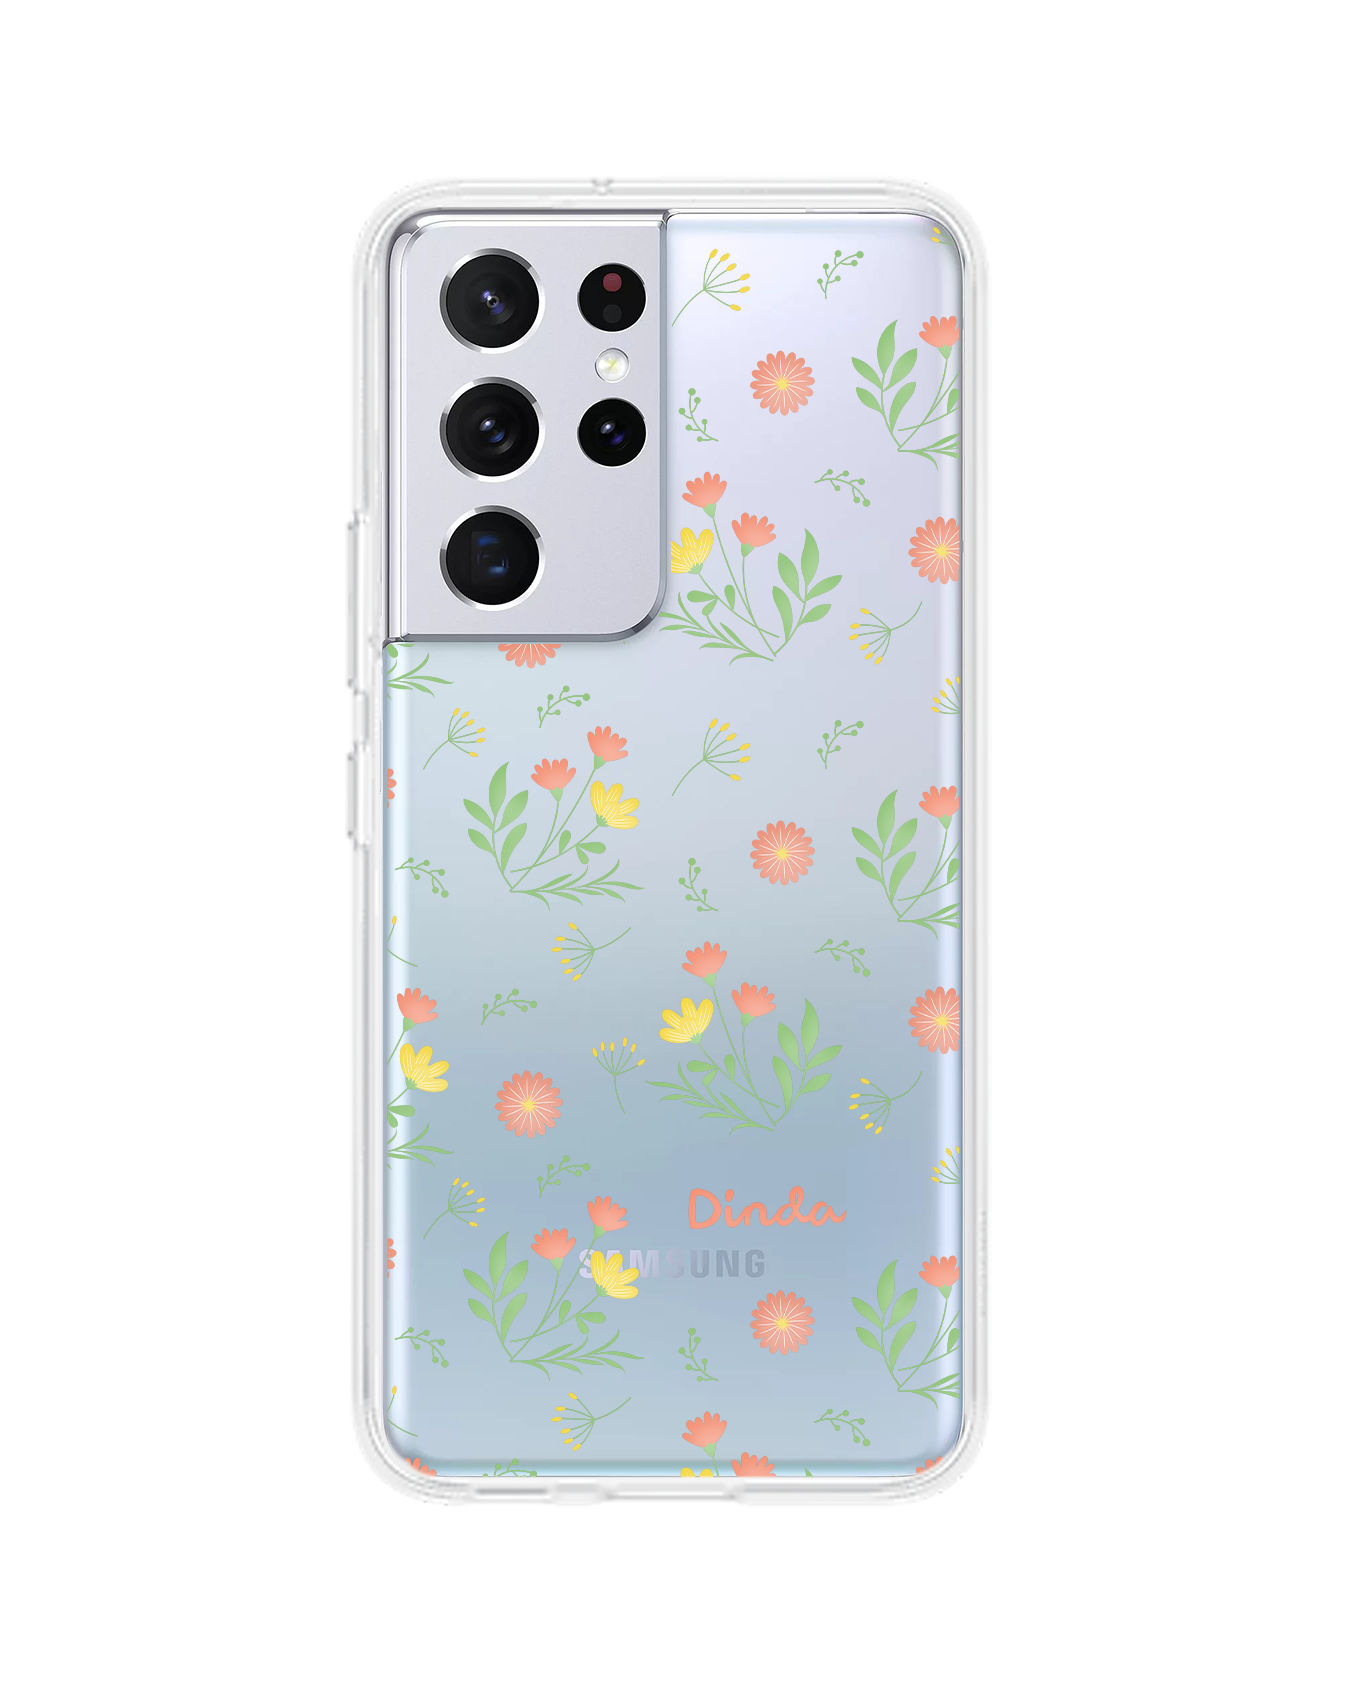 Android Rearguard Hybrid Case - Dandelion